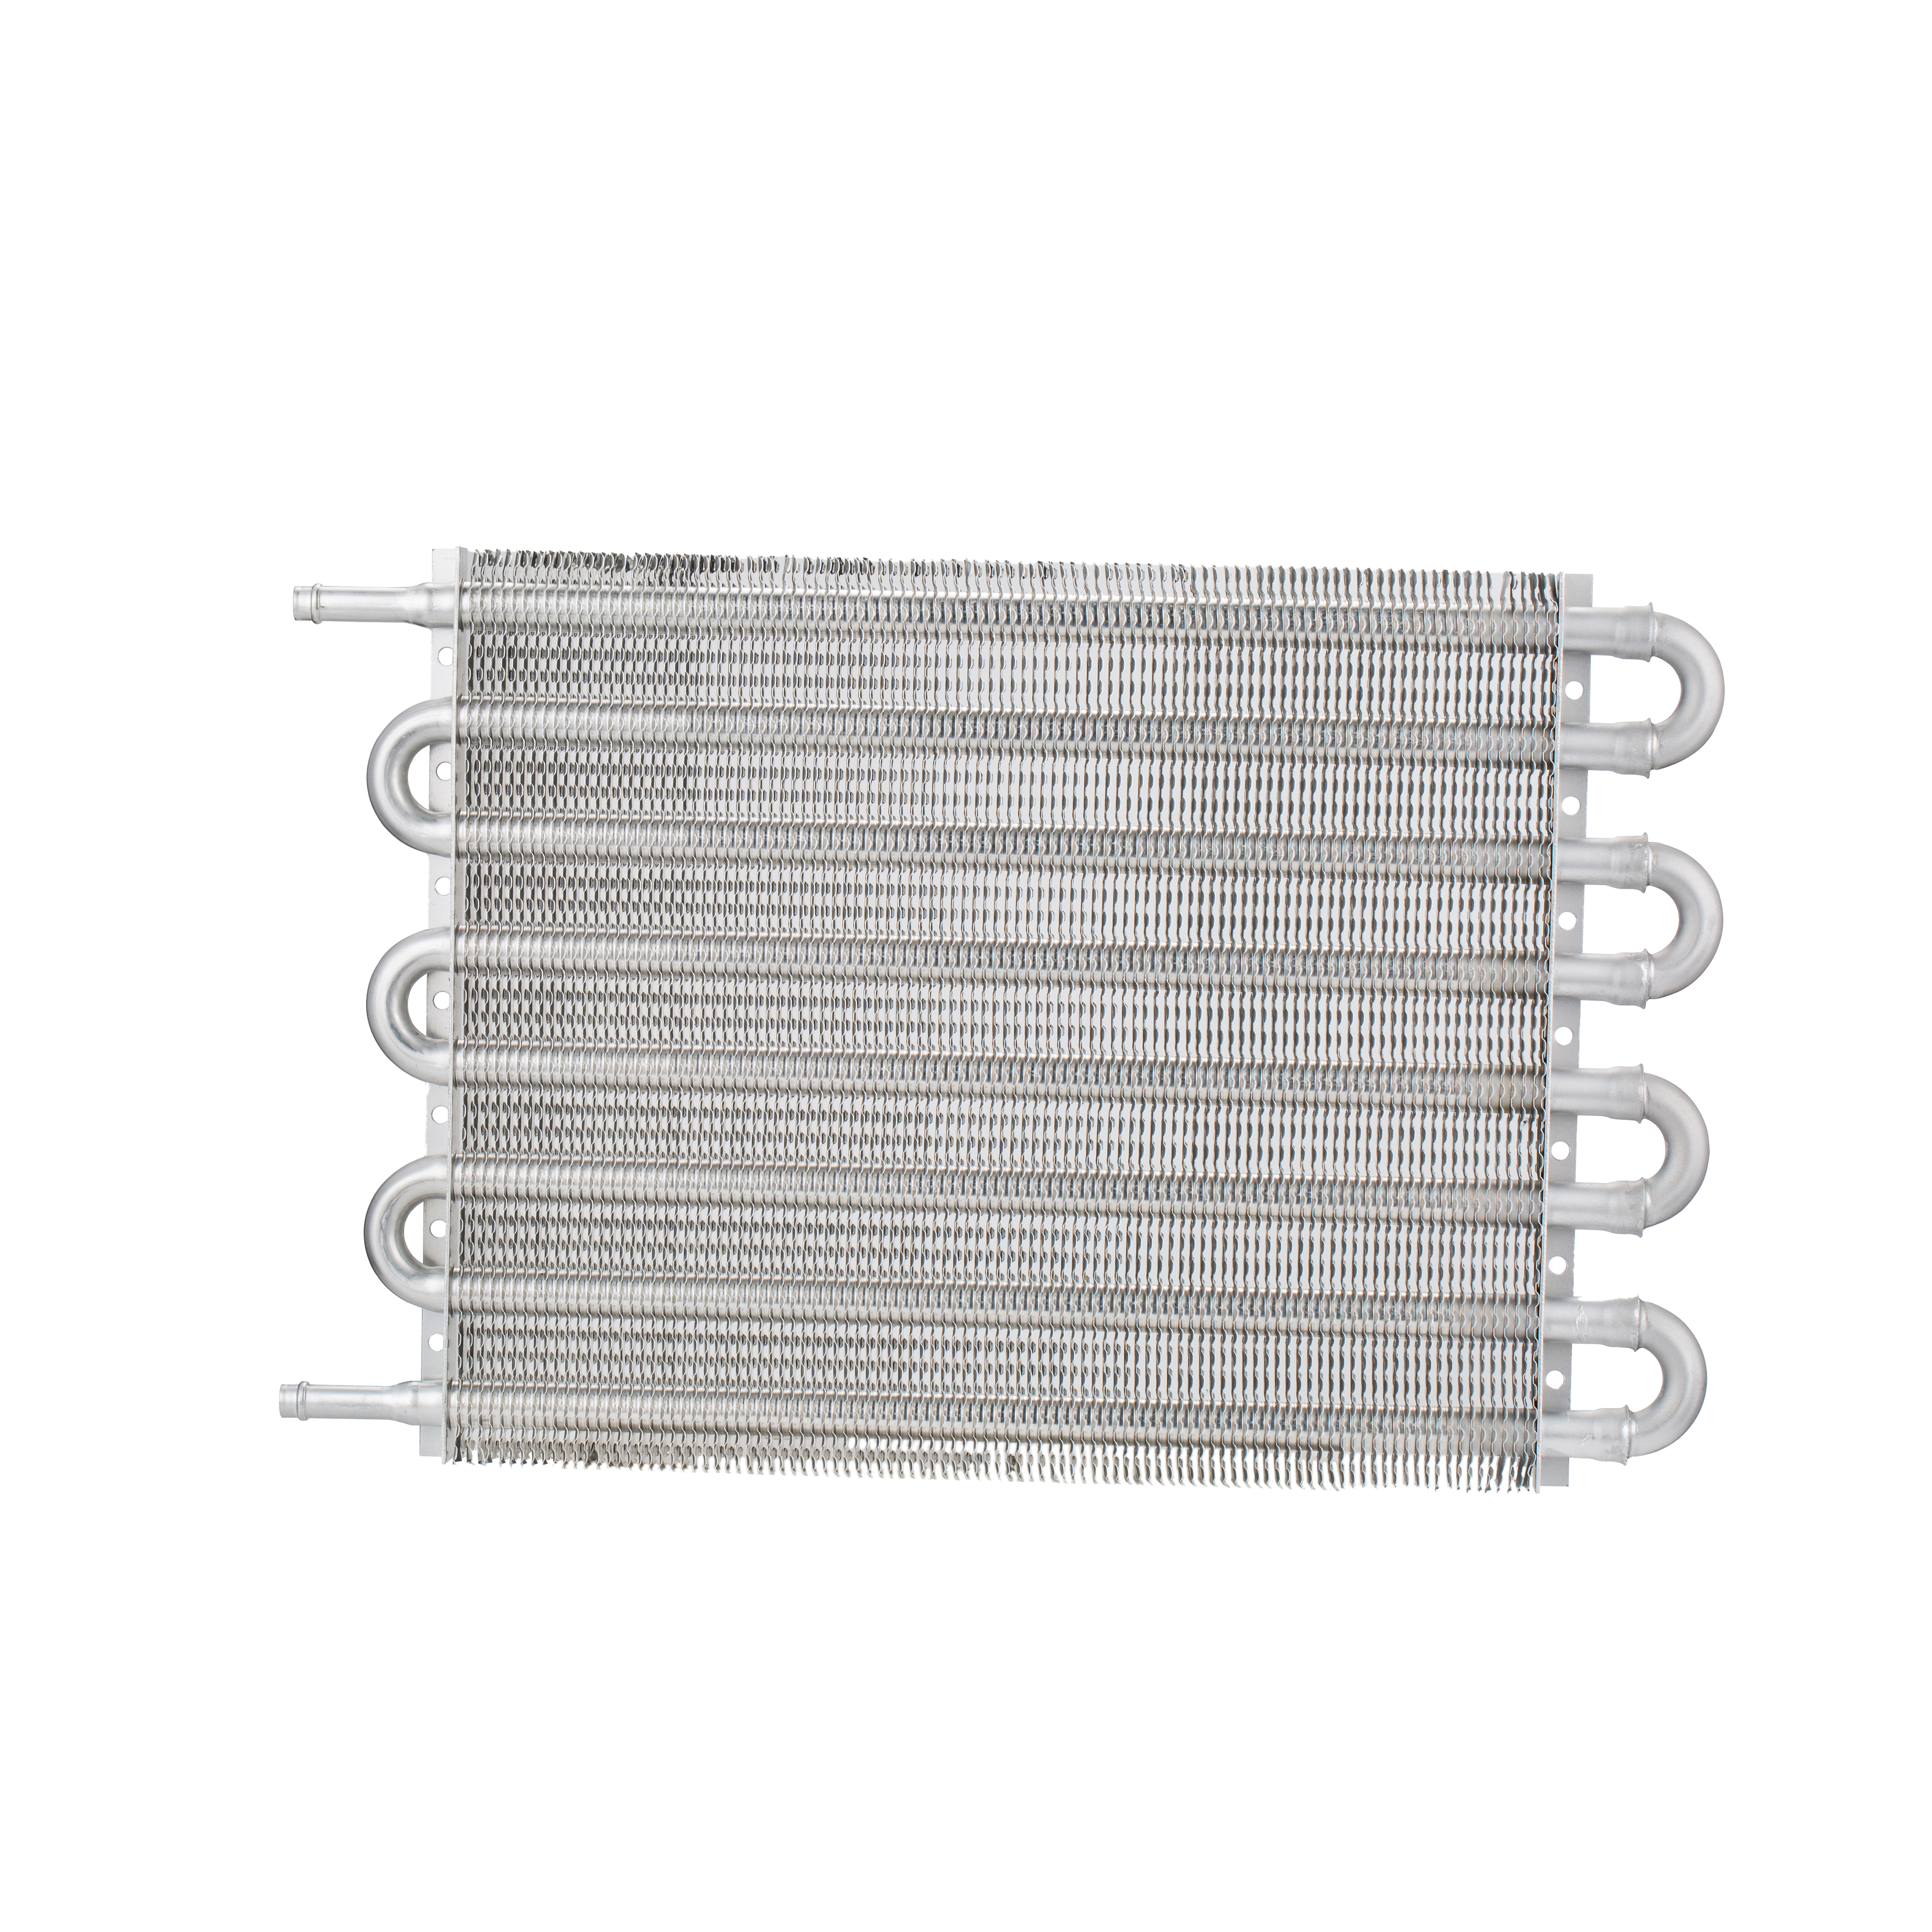 HAOFA Universal Silver color 8 Row 8 Pass Tube and Fin Transmission Cooler Universal Oil Cooler Aluminium Featured Image